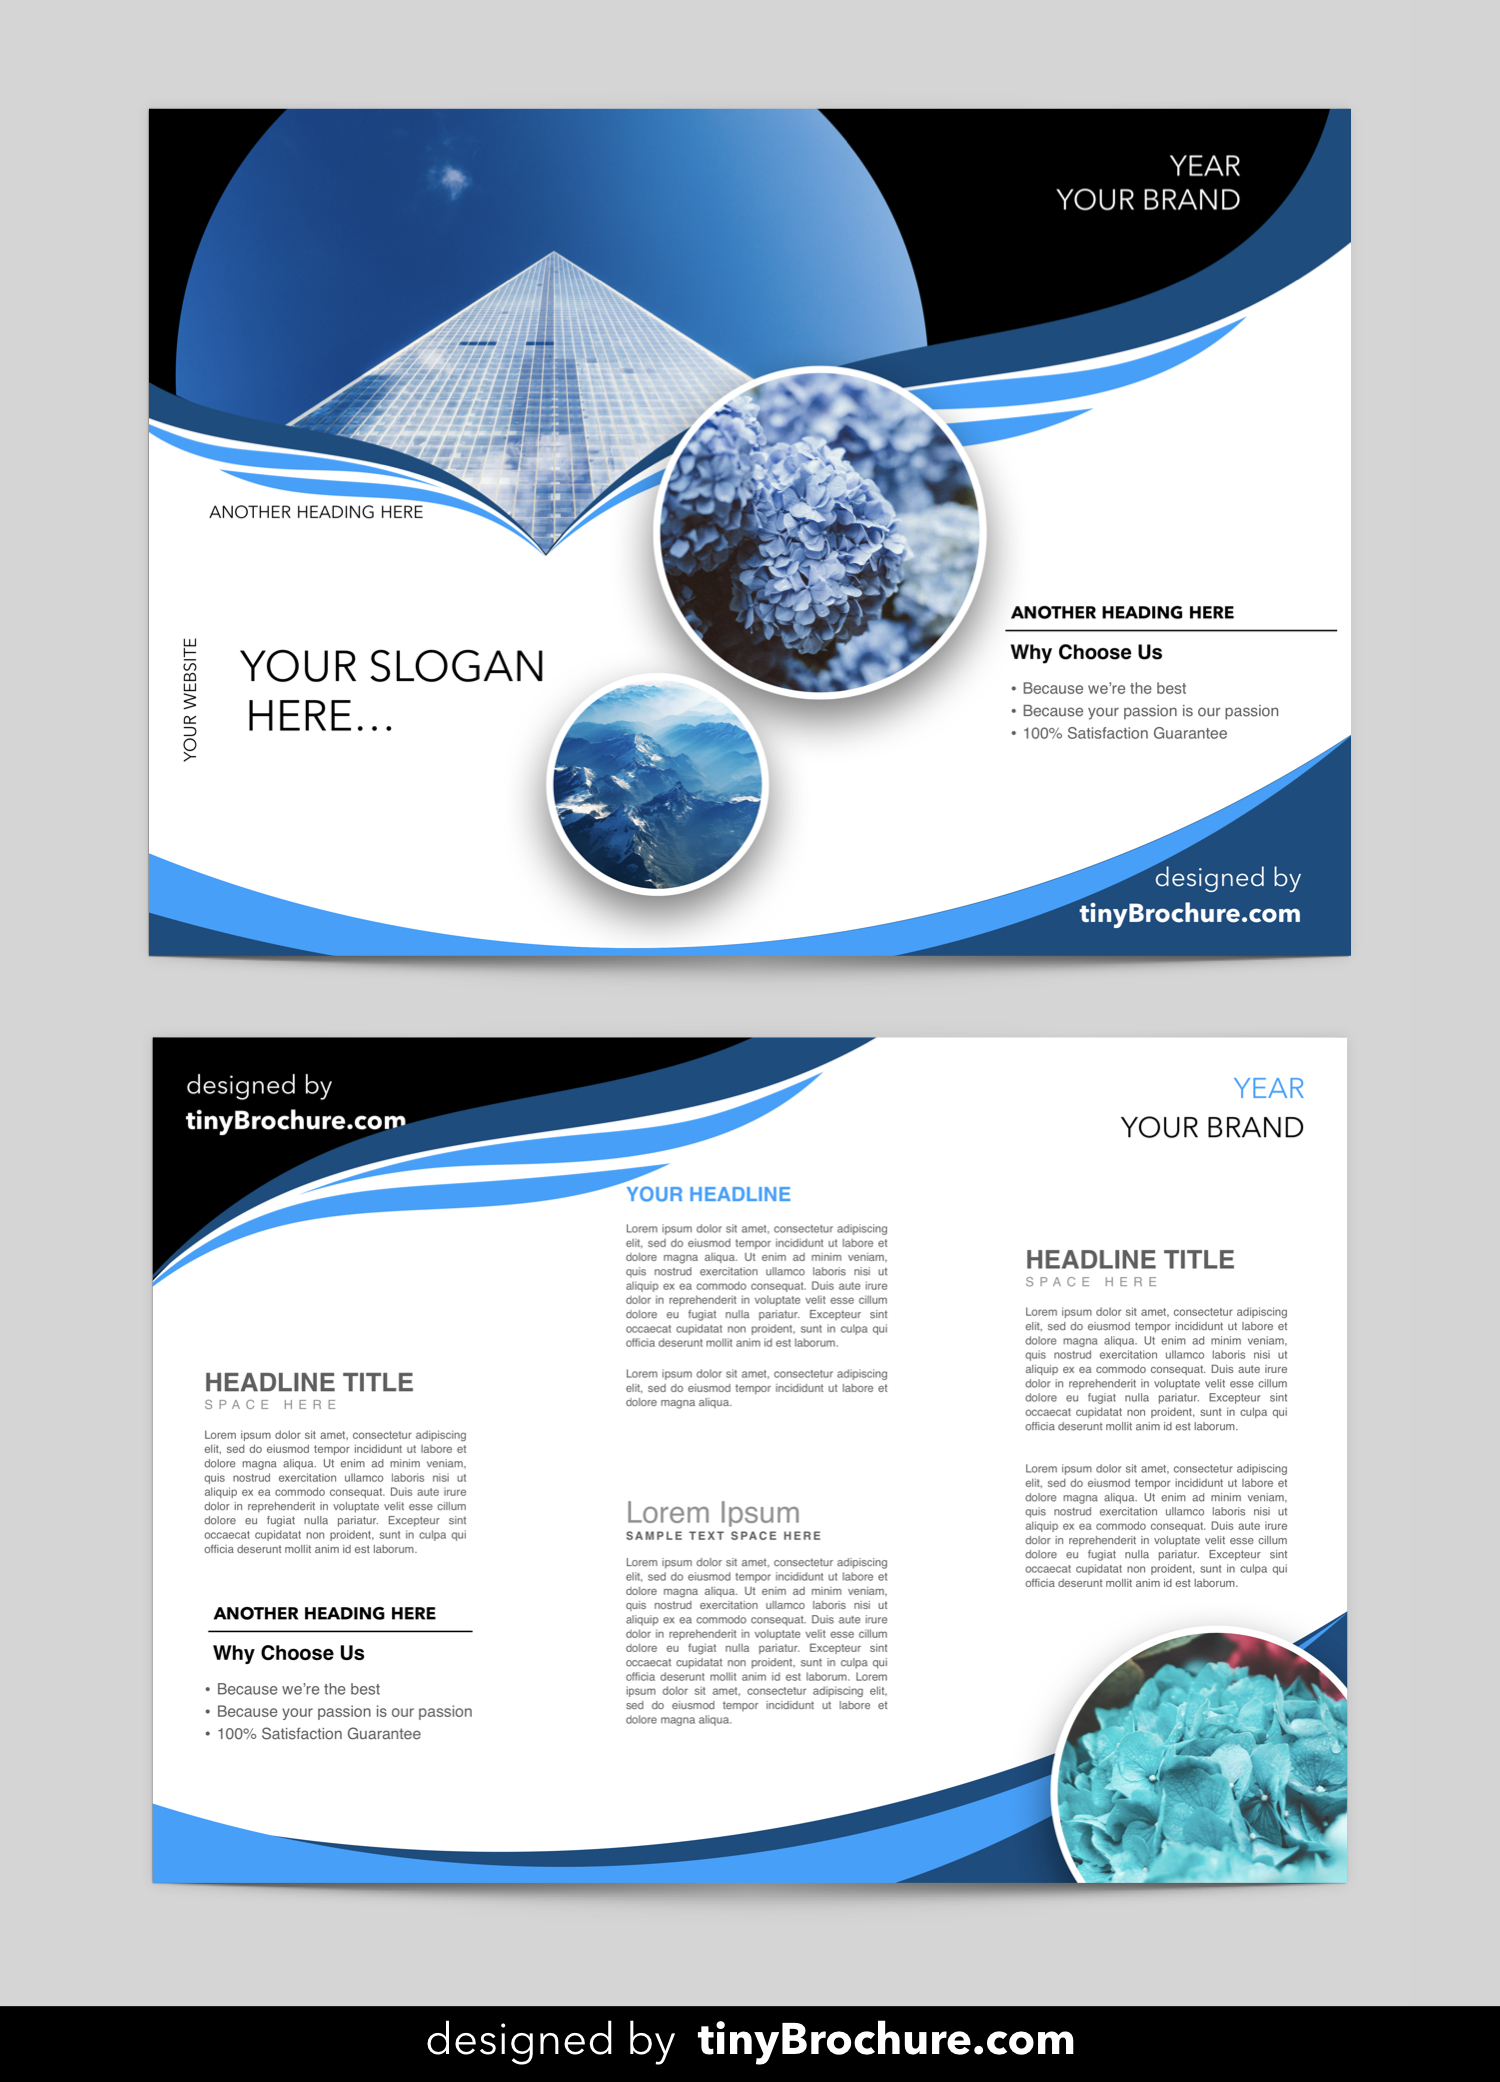 003 Microsoft Brochure Template Free Ideas Wondrous With Regard To Free Brochure Templates For Word 2010